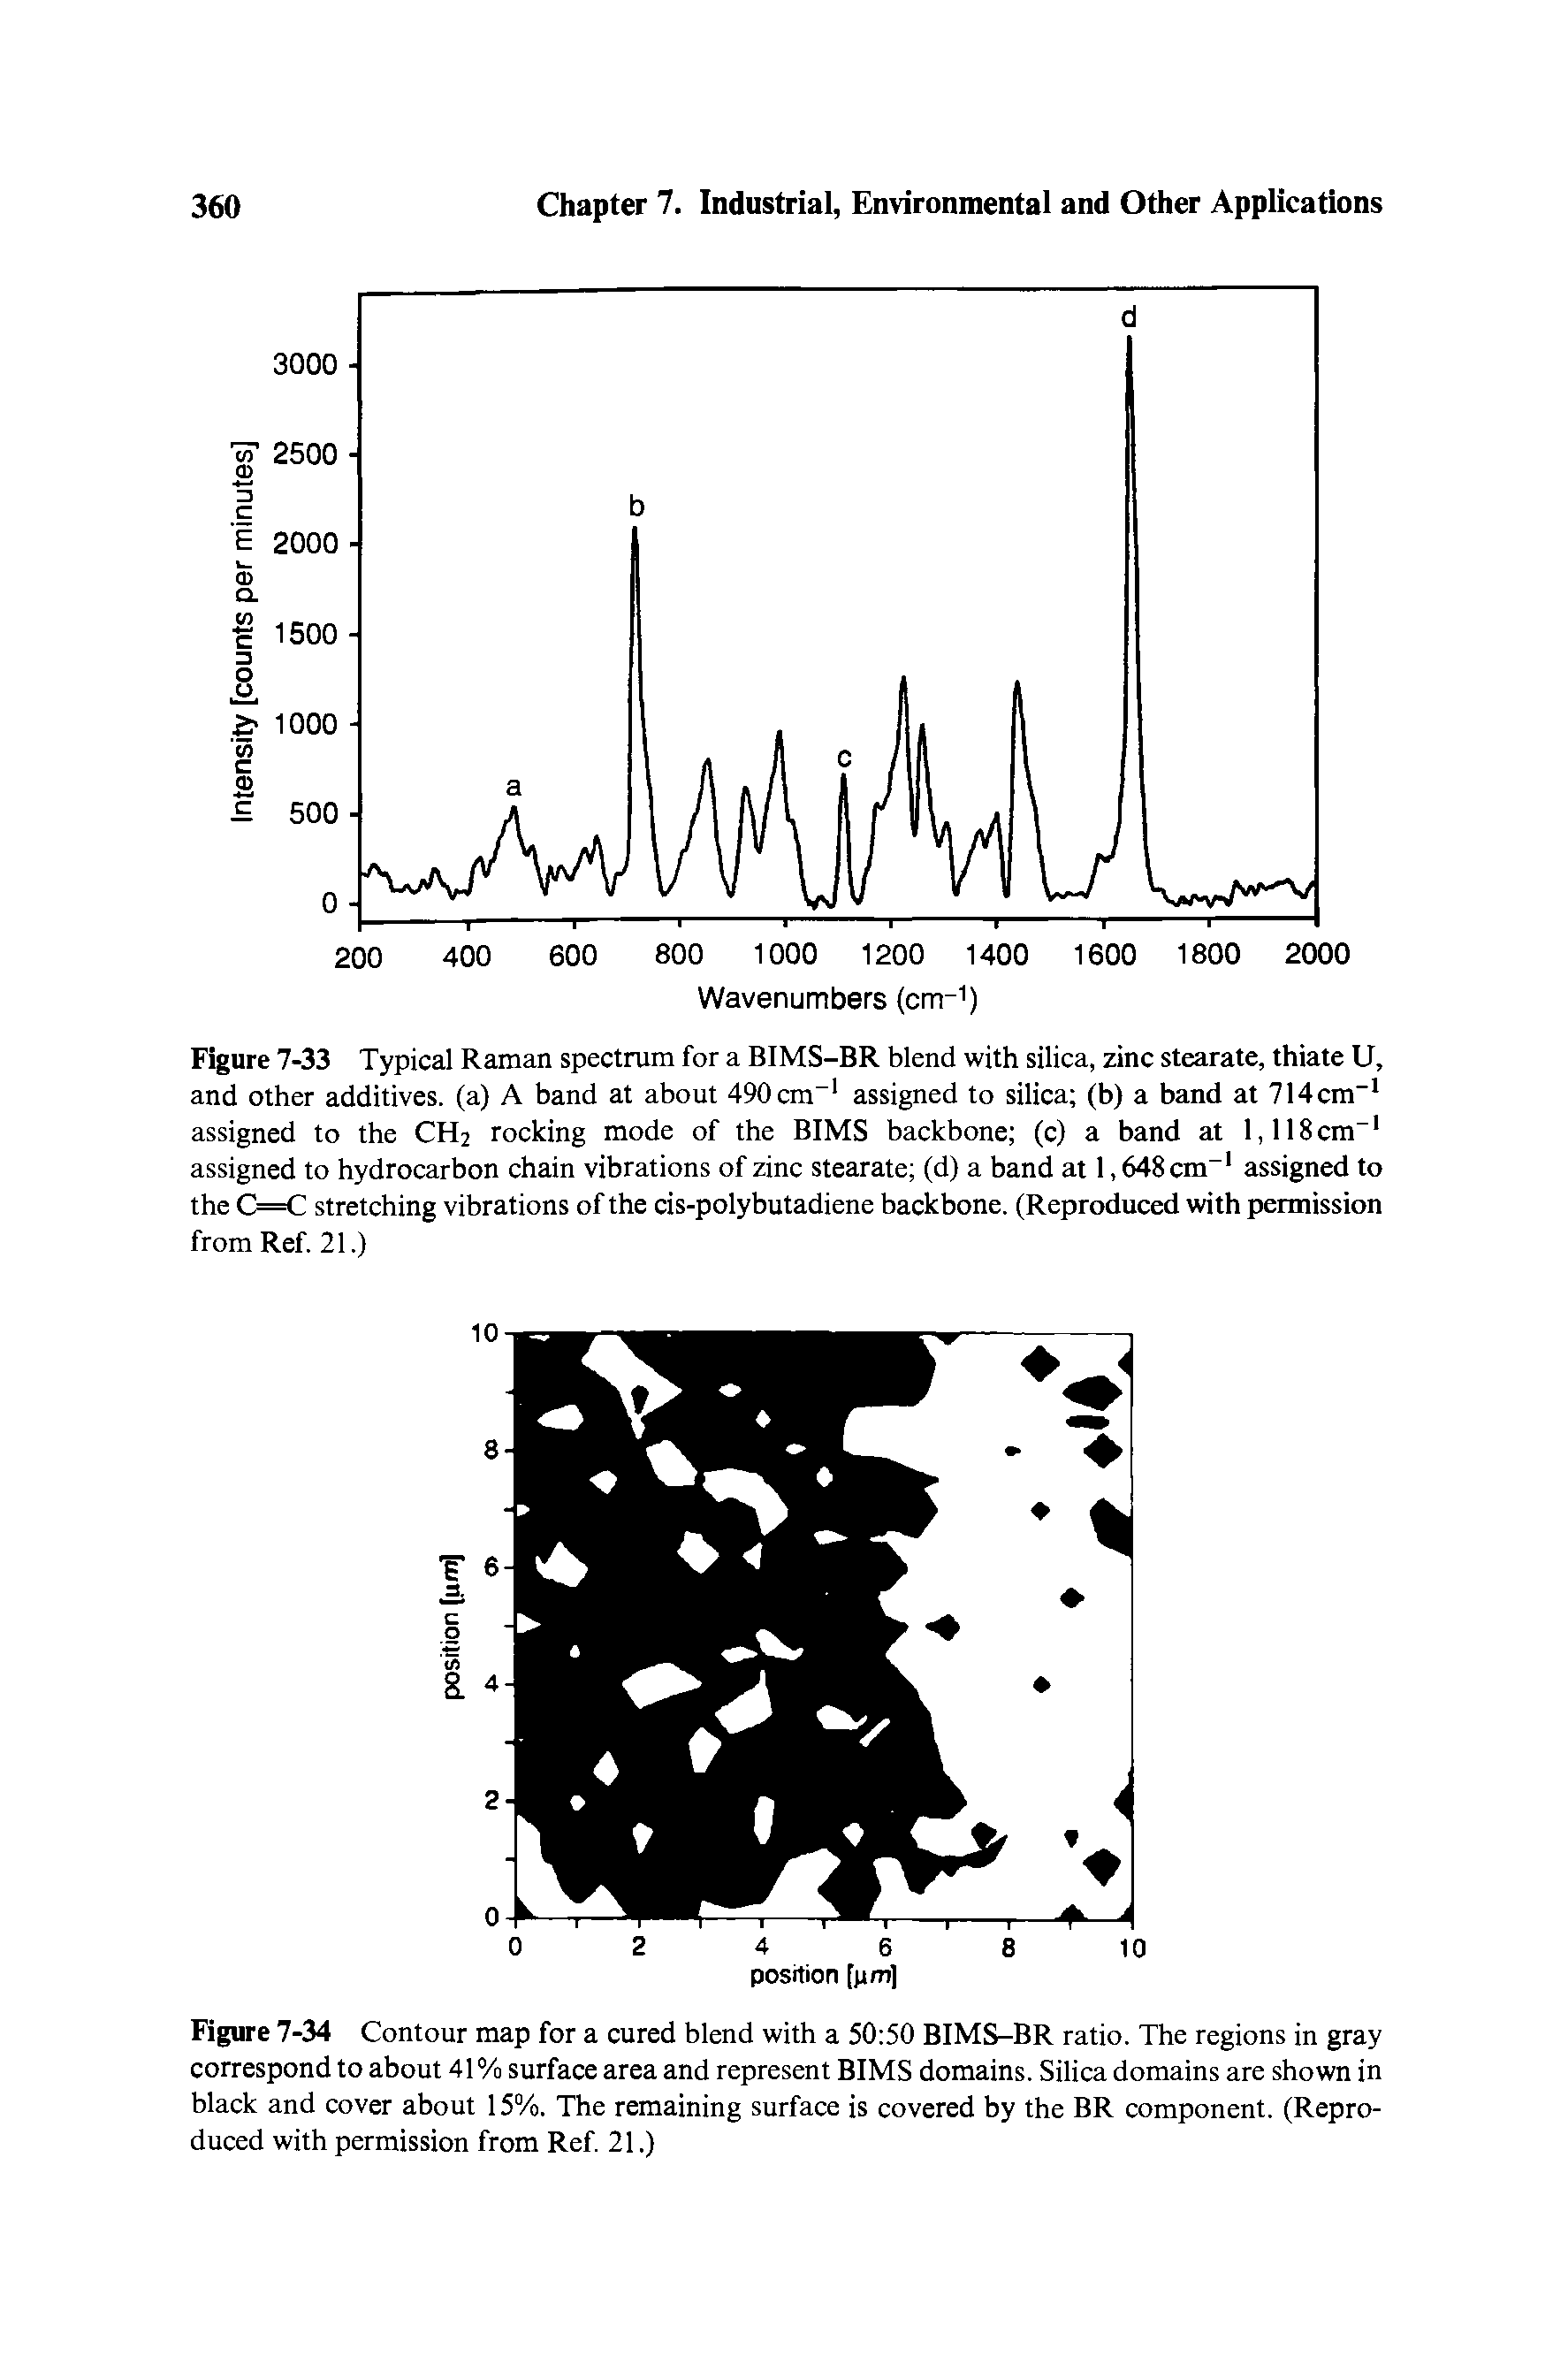 Figure 7-33 Typical Raman spectrum for a BIMS-BR blend with silica, zinc stearate, thiate U, and other additives, (a) A band at about 490cm-1 assigned to silica (b) a band at 714cm-1 assigned to the CH2 rocking mode of the BIMS backbone (c) a band at 1,118cm-1 assigned to hydrocarbon chain vibrations of zinc stearate (d) a band at 1,648 cm-1 assigned to the C=C stretching vibrations of the cis-polybutadiene backbone. (Reproduced with permission from Ref. 21.)...